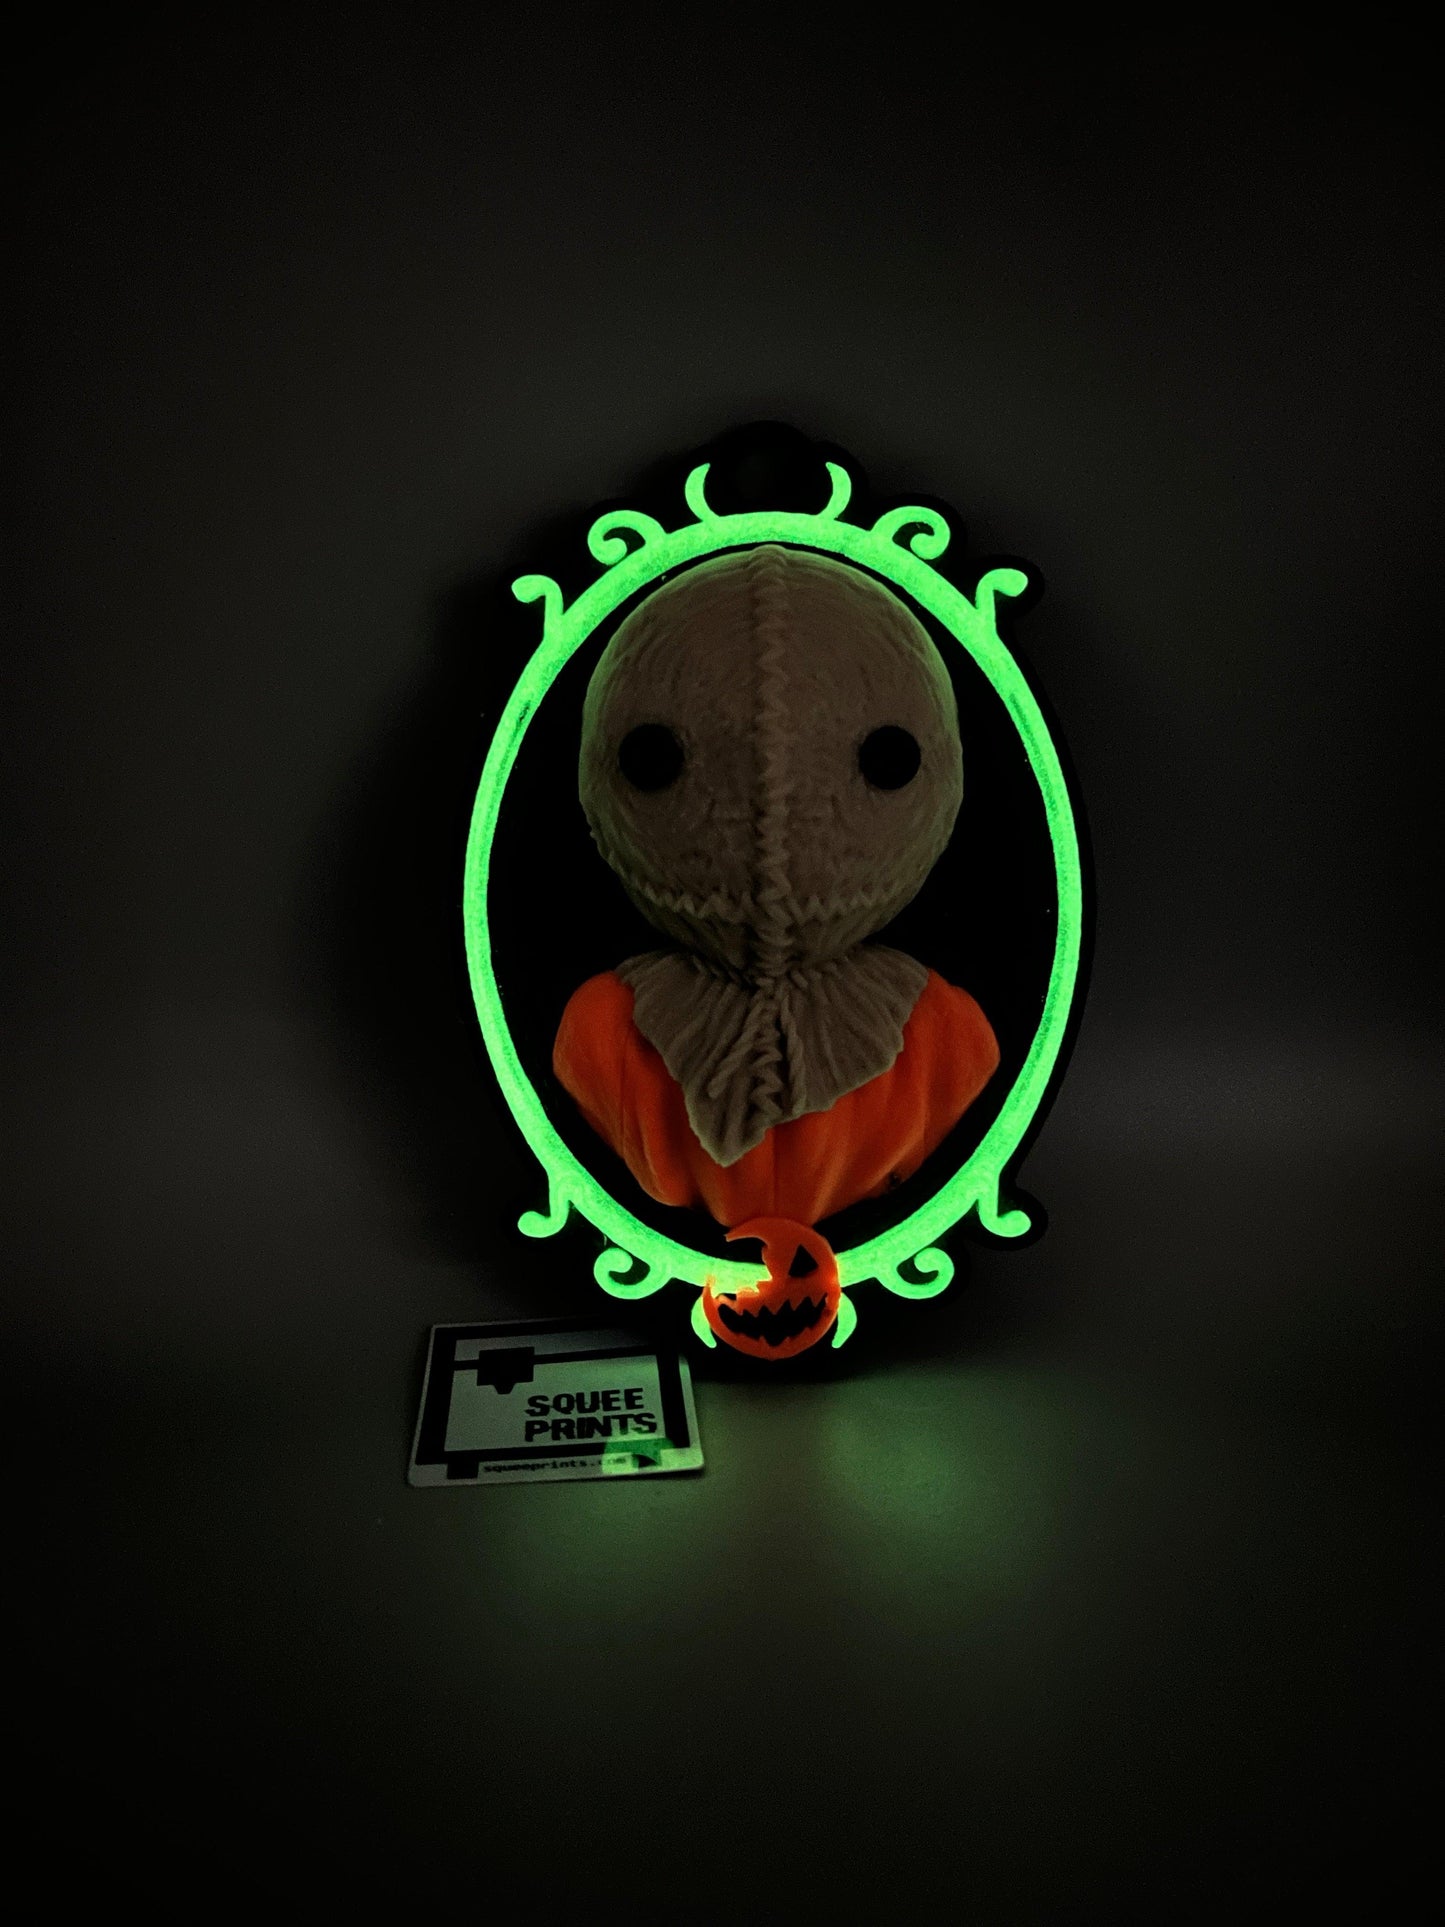 Sam Hain | Wall Plaque | Glow in the Dark - Squee Prints